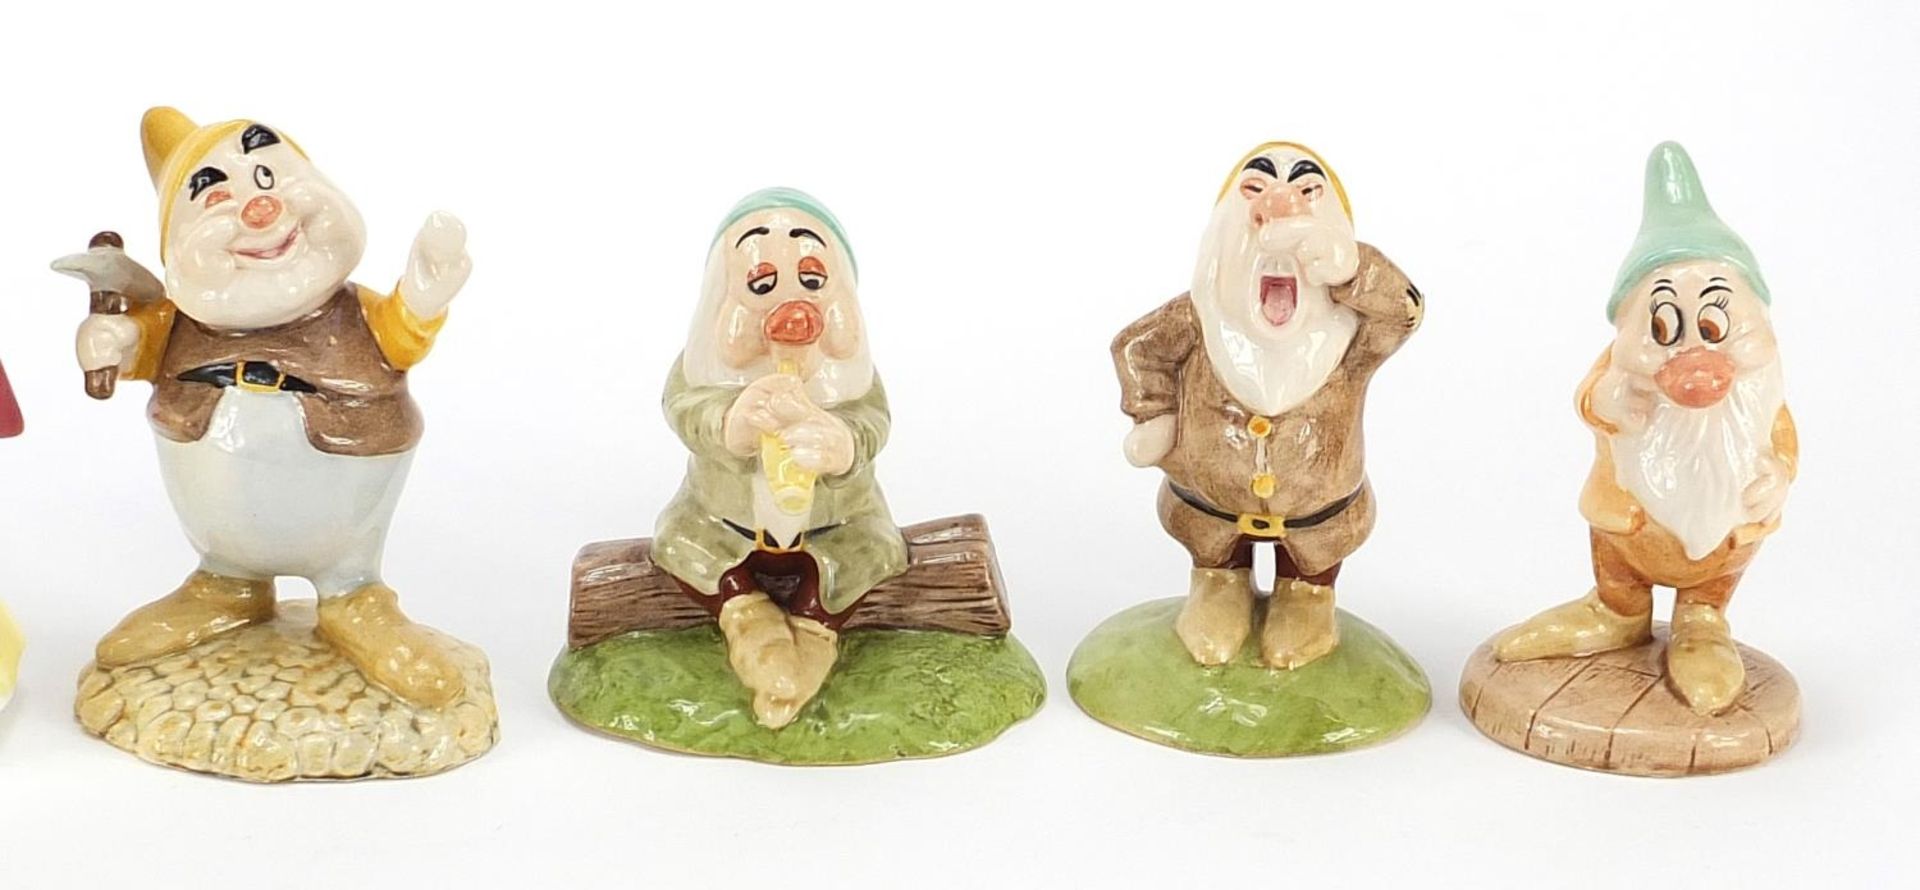 Royal Doulton Snow White & The Seven Dwarfs with boxes, the largest 15cm high - Image 4 of 7